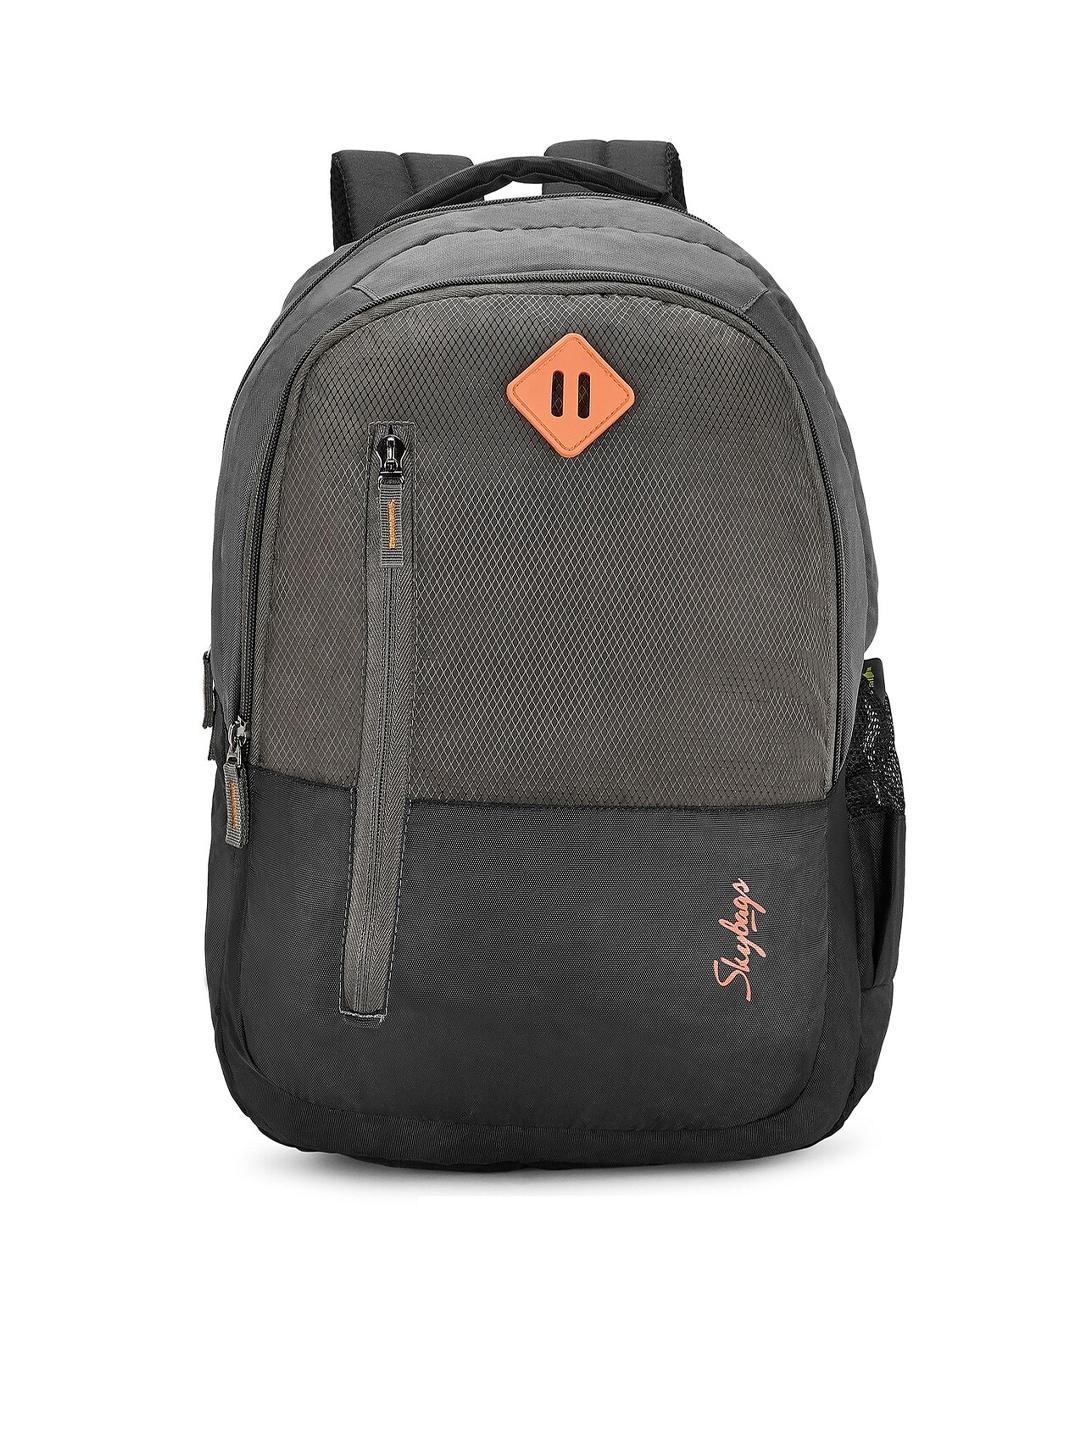 Skybags Unisex Laptop Backpack